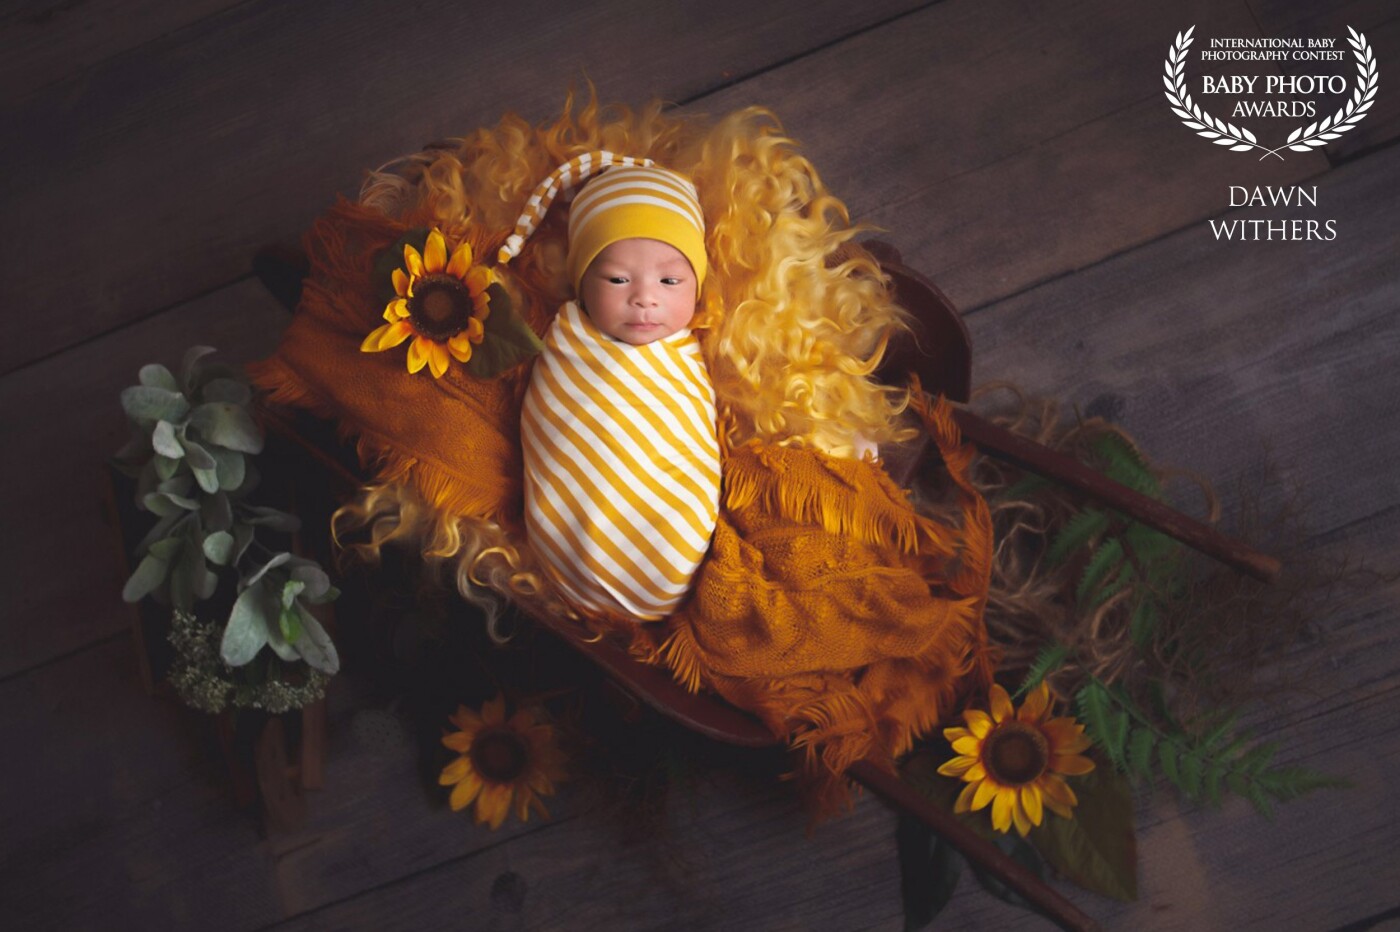 This little guys mom was due to come in for a late maternity session but we had to move it due to a bad snow storm. Then he arrived sooner than we anticipated! Mom loved yellow so I thought what better way to include it and add a little sunshine than to add some sunflowers to brighten up this image and highlight this adorable little guy. He is resting in a little antique wheelbarrow that my sister found at an antique market and bought for me. I added a slight matte look and finish a little vignette to make it a little more dramatic and moody.